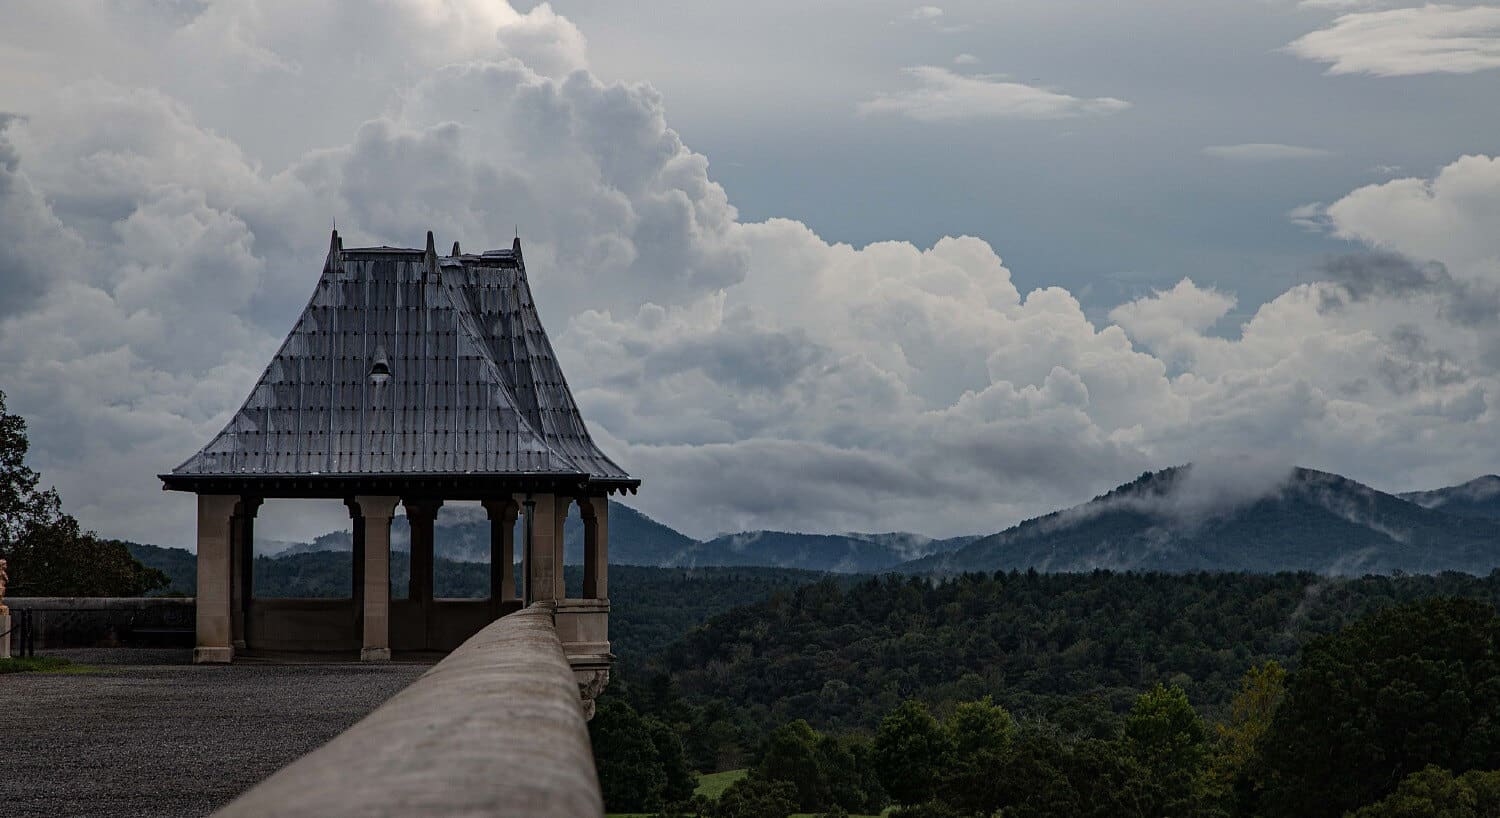 Gazebo at the corner of a walkway overlooking a vast forested mountain range under a cloudy sky